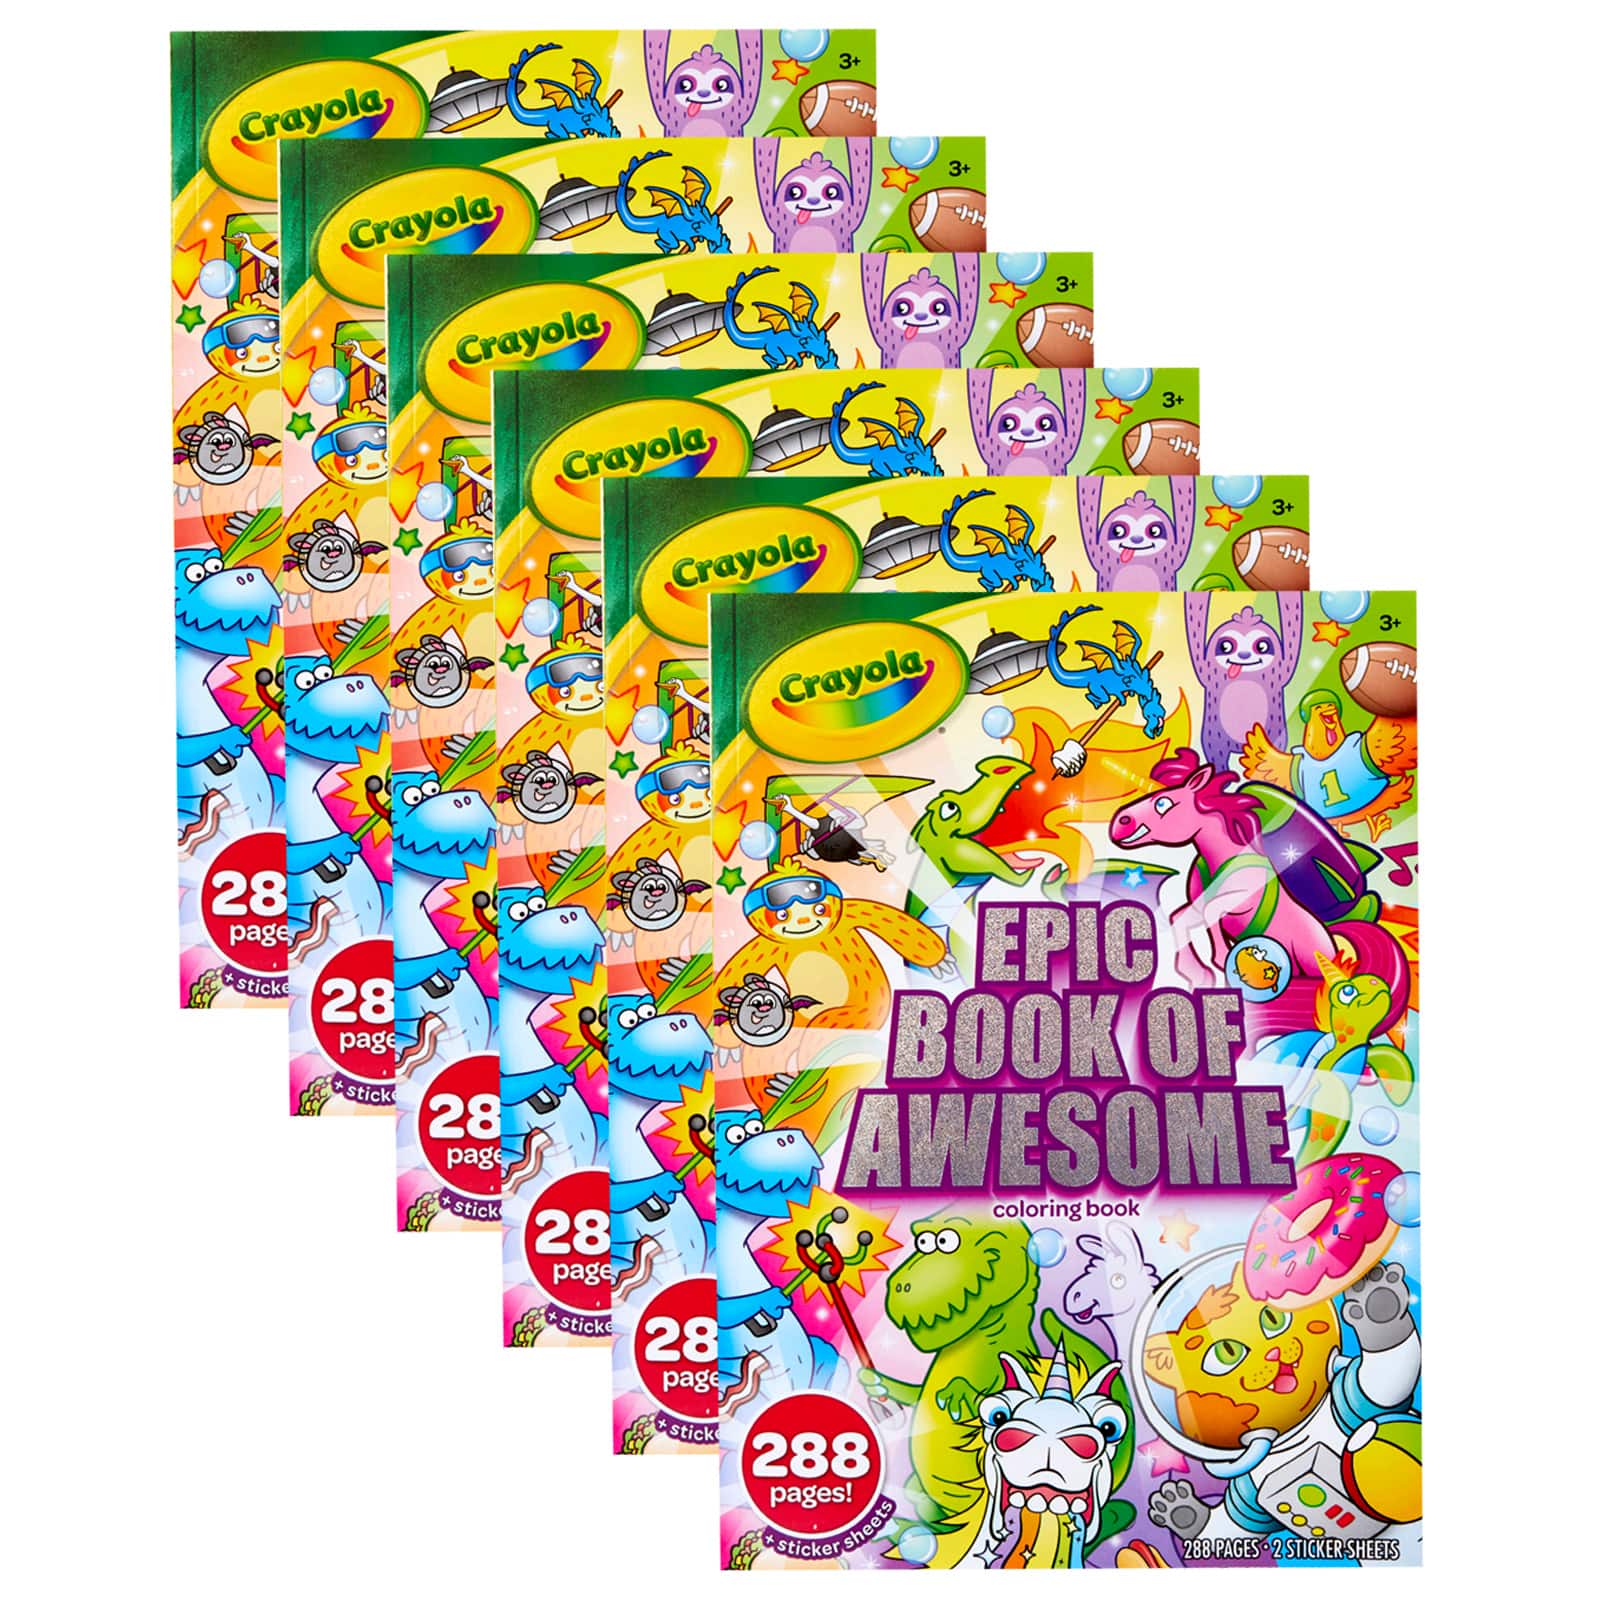 Details about   Crayola Epic Book of Awesome Coloring Book 288 Pages with Stickers Inside 